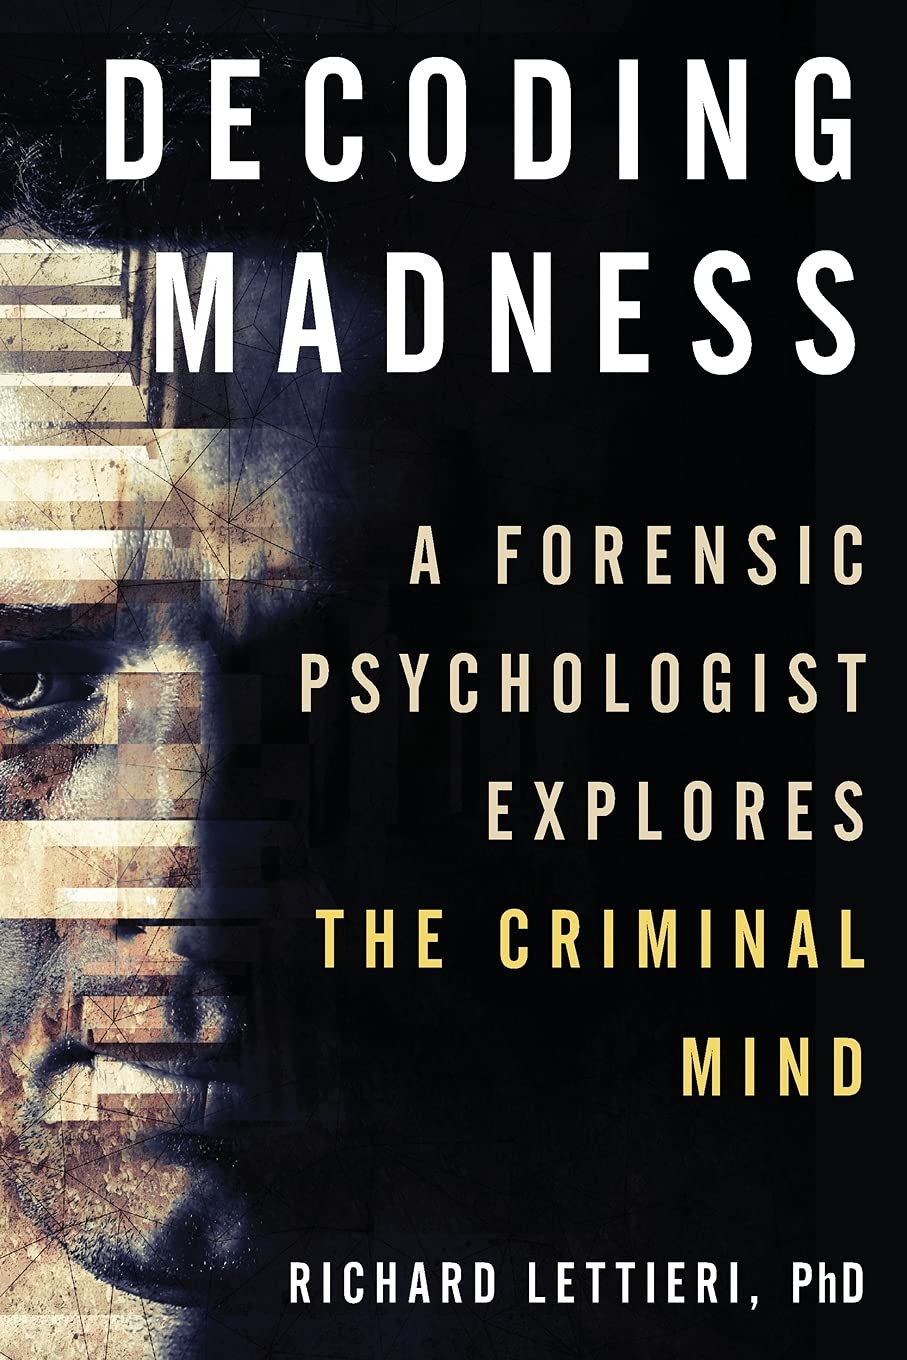 Decoding Madness: A Forensic Psychologist Explores the Criminal Mind, book cover